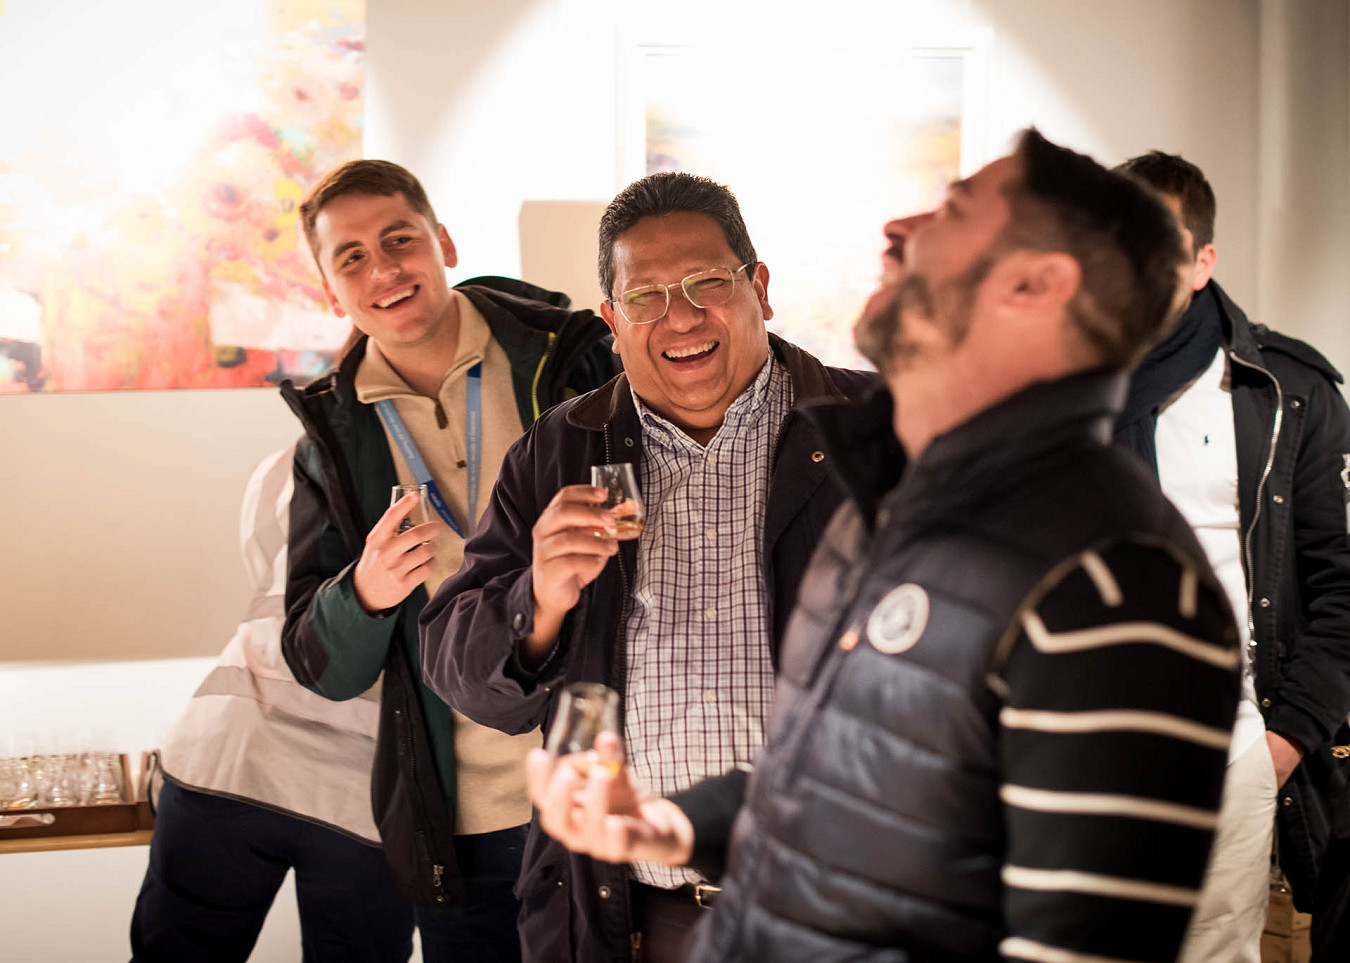 Three men smile and laugh as they sample a whisky at a distillery tour